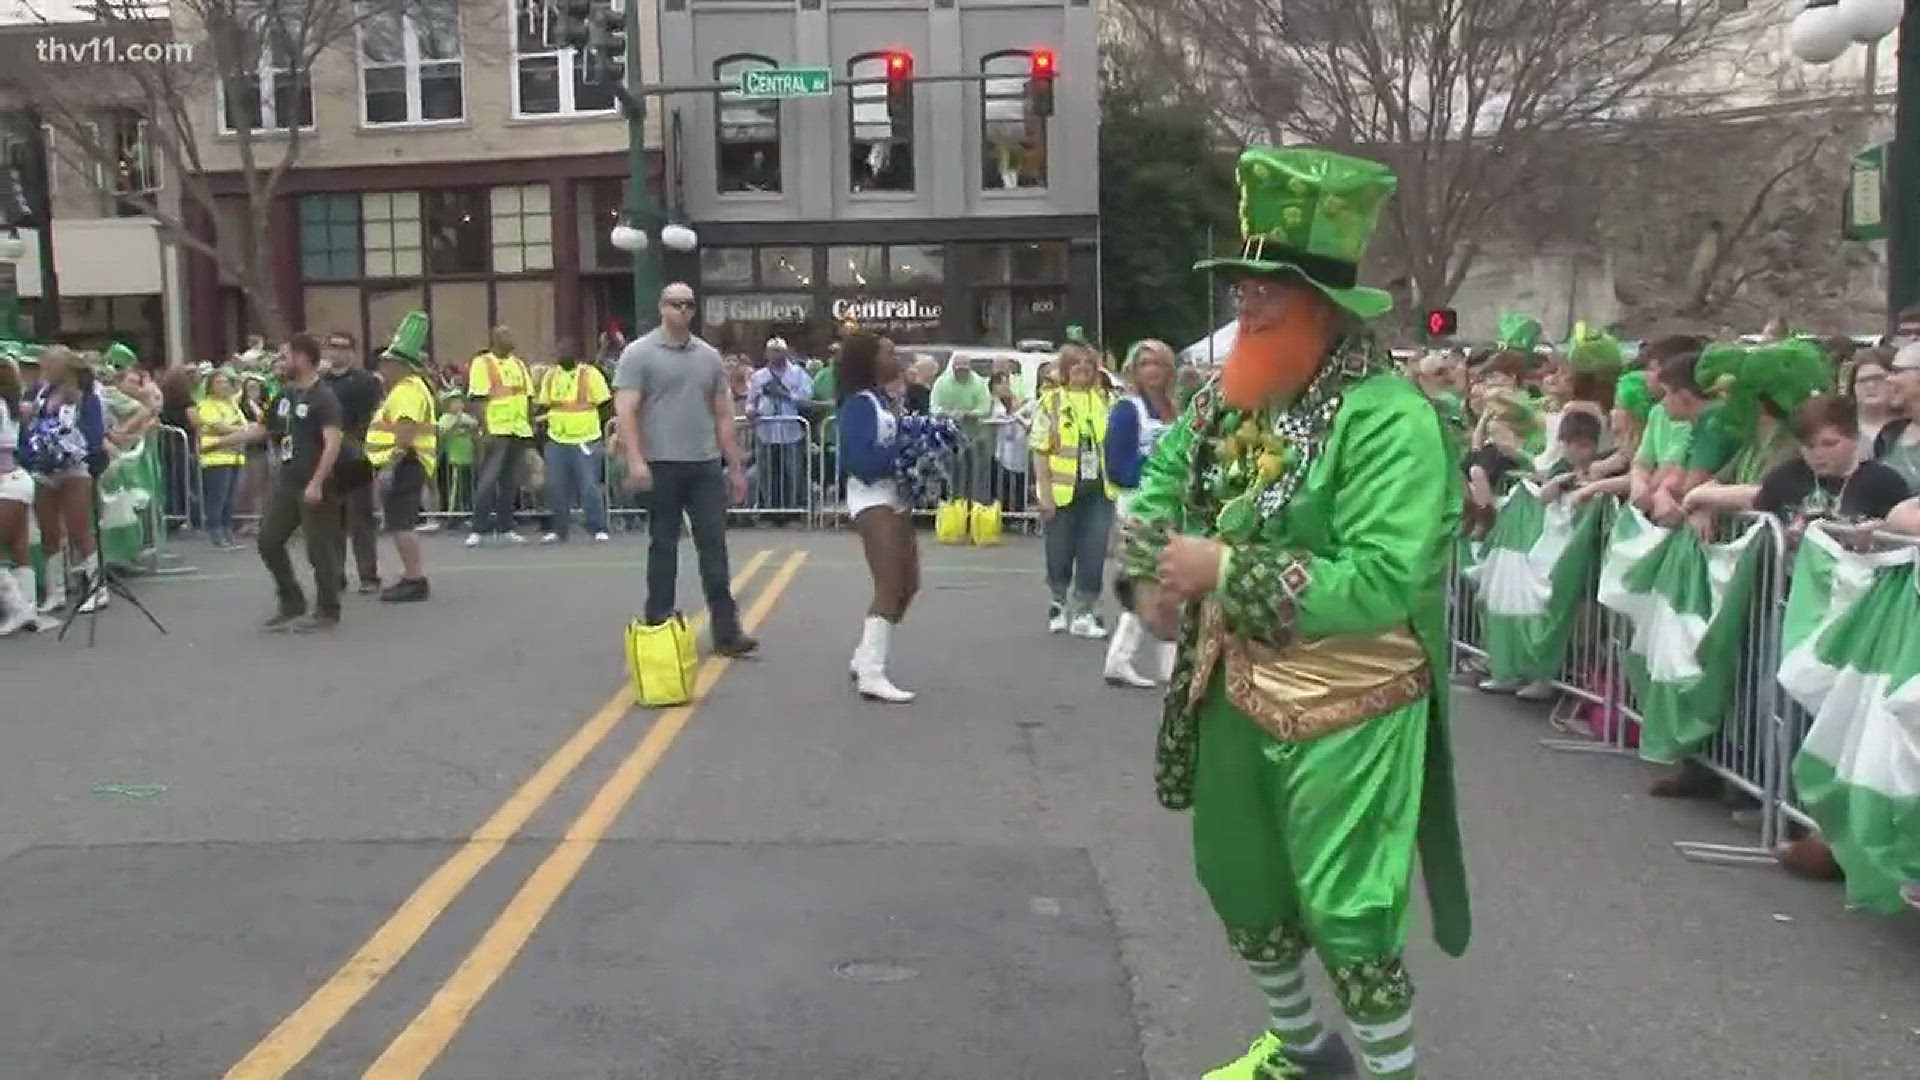 For the first time in 15 years, the World's Shortest St. Patrick's Day Parade landed on the same day as the Rebel Stakes.